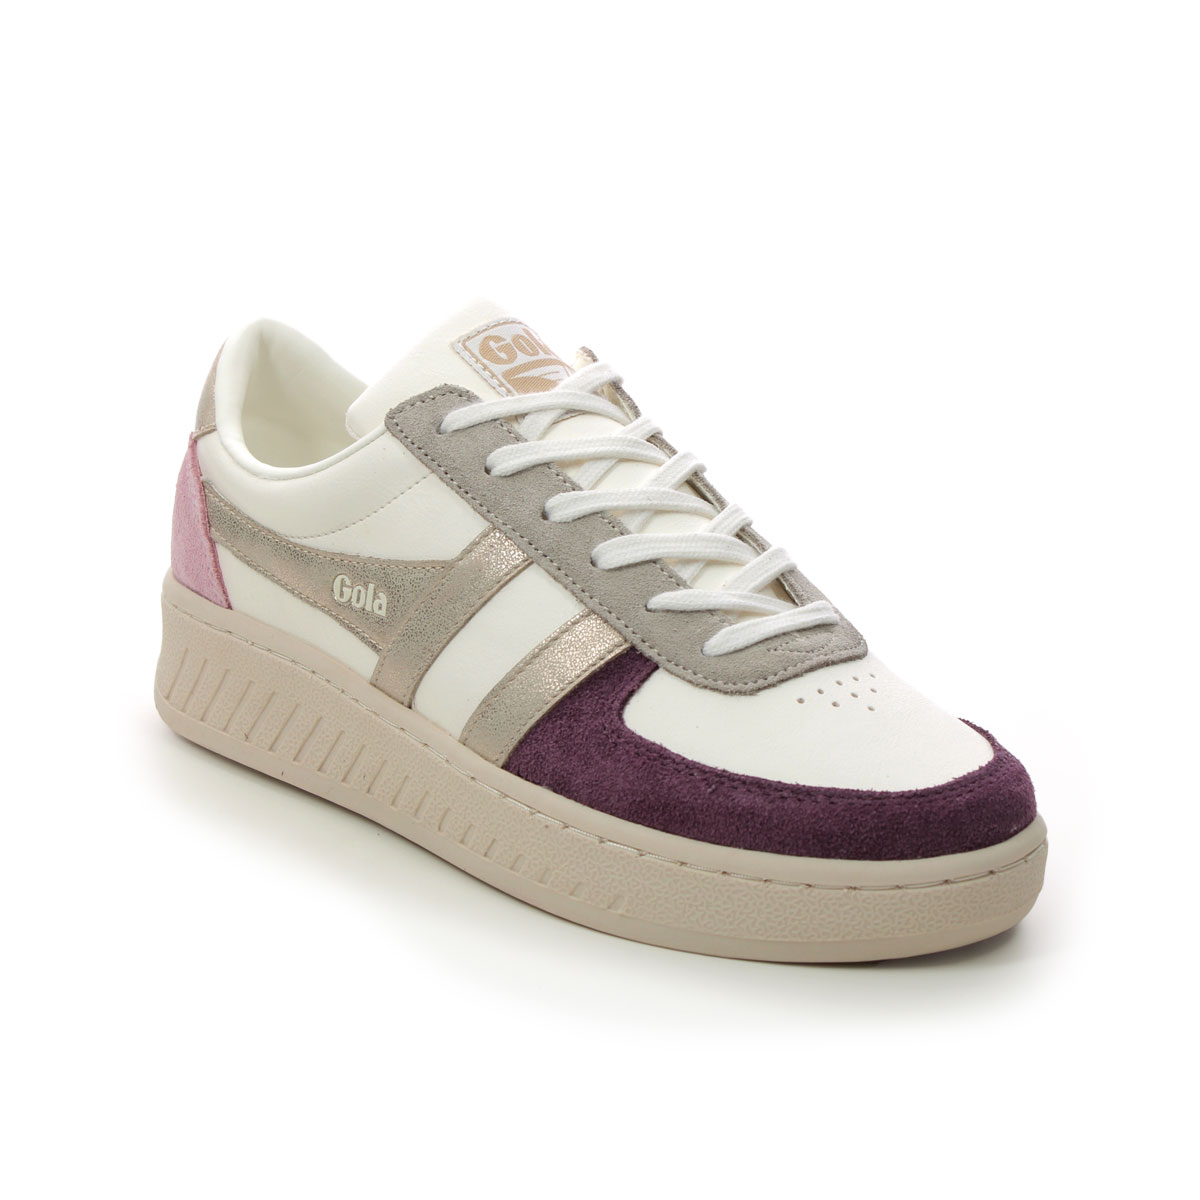 Gola Grandslam W White multi Womens trainers CLB207-ZR in a Plain Leather in Size 4